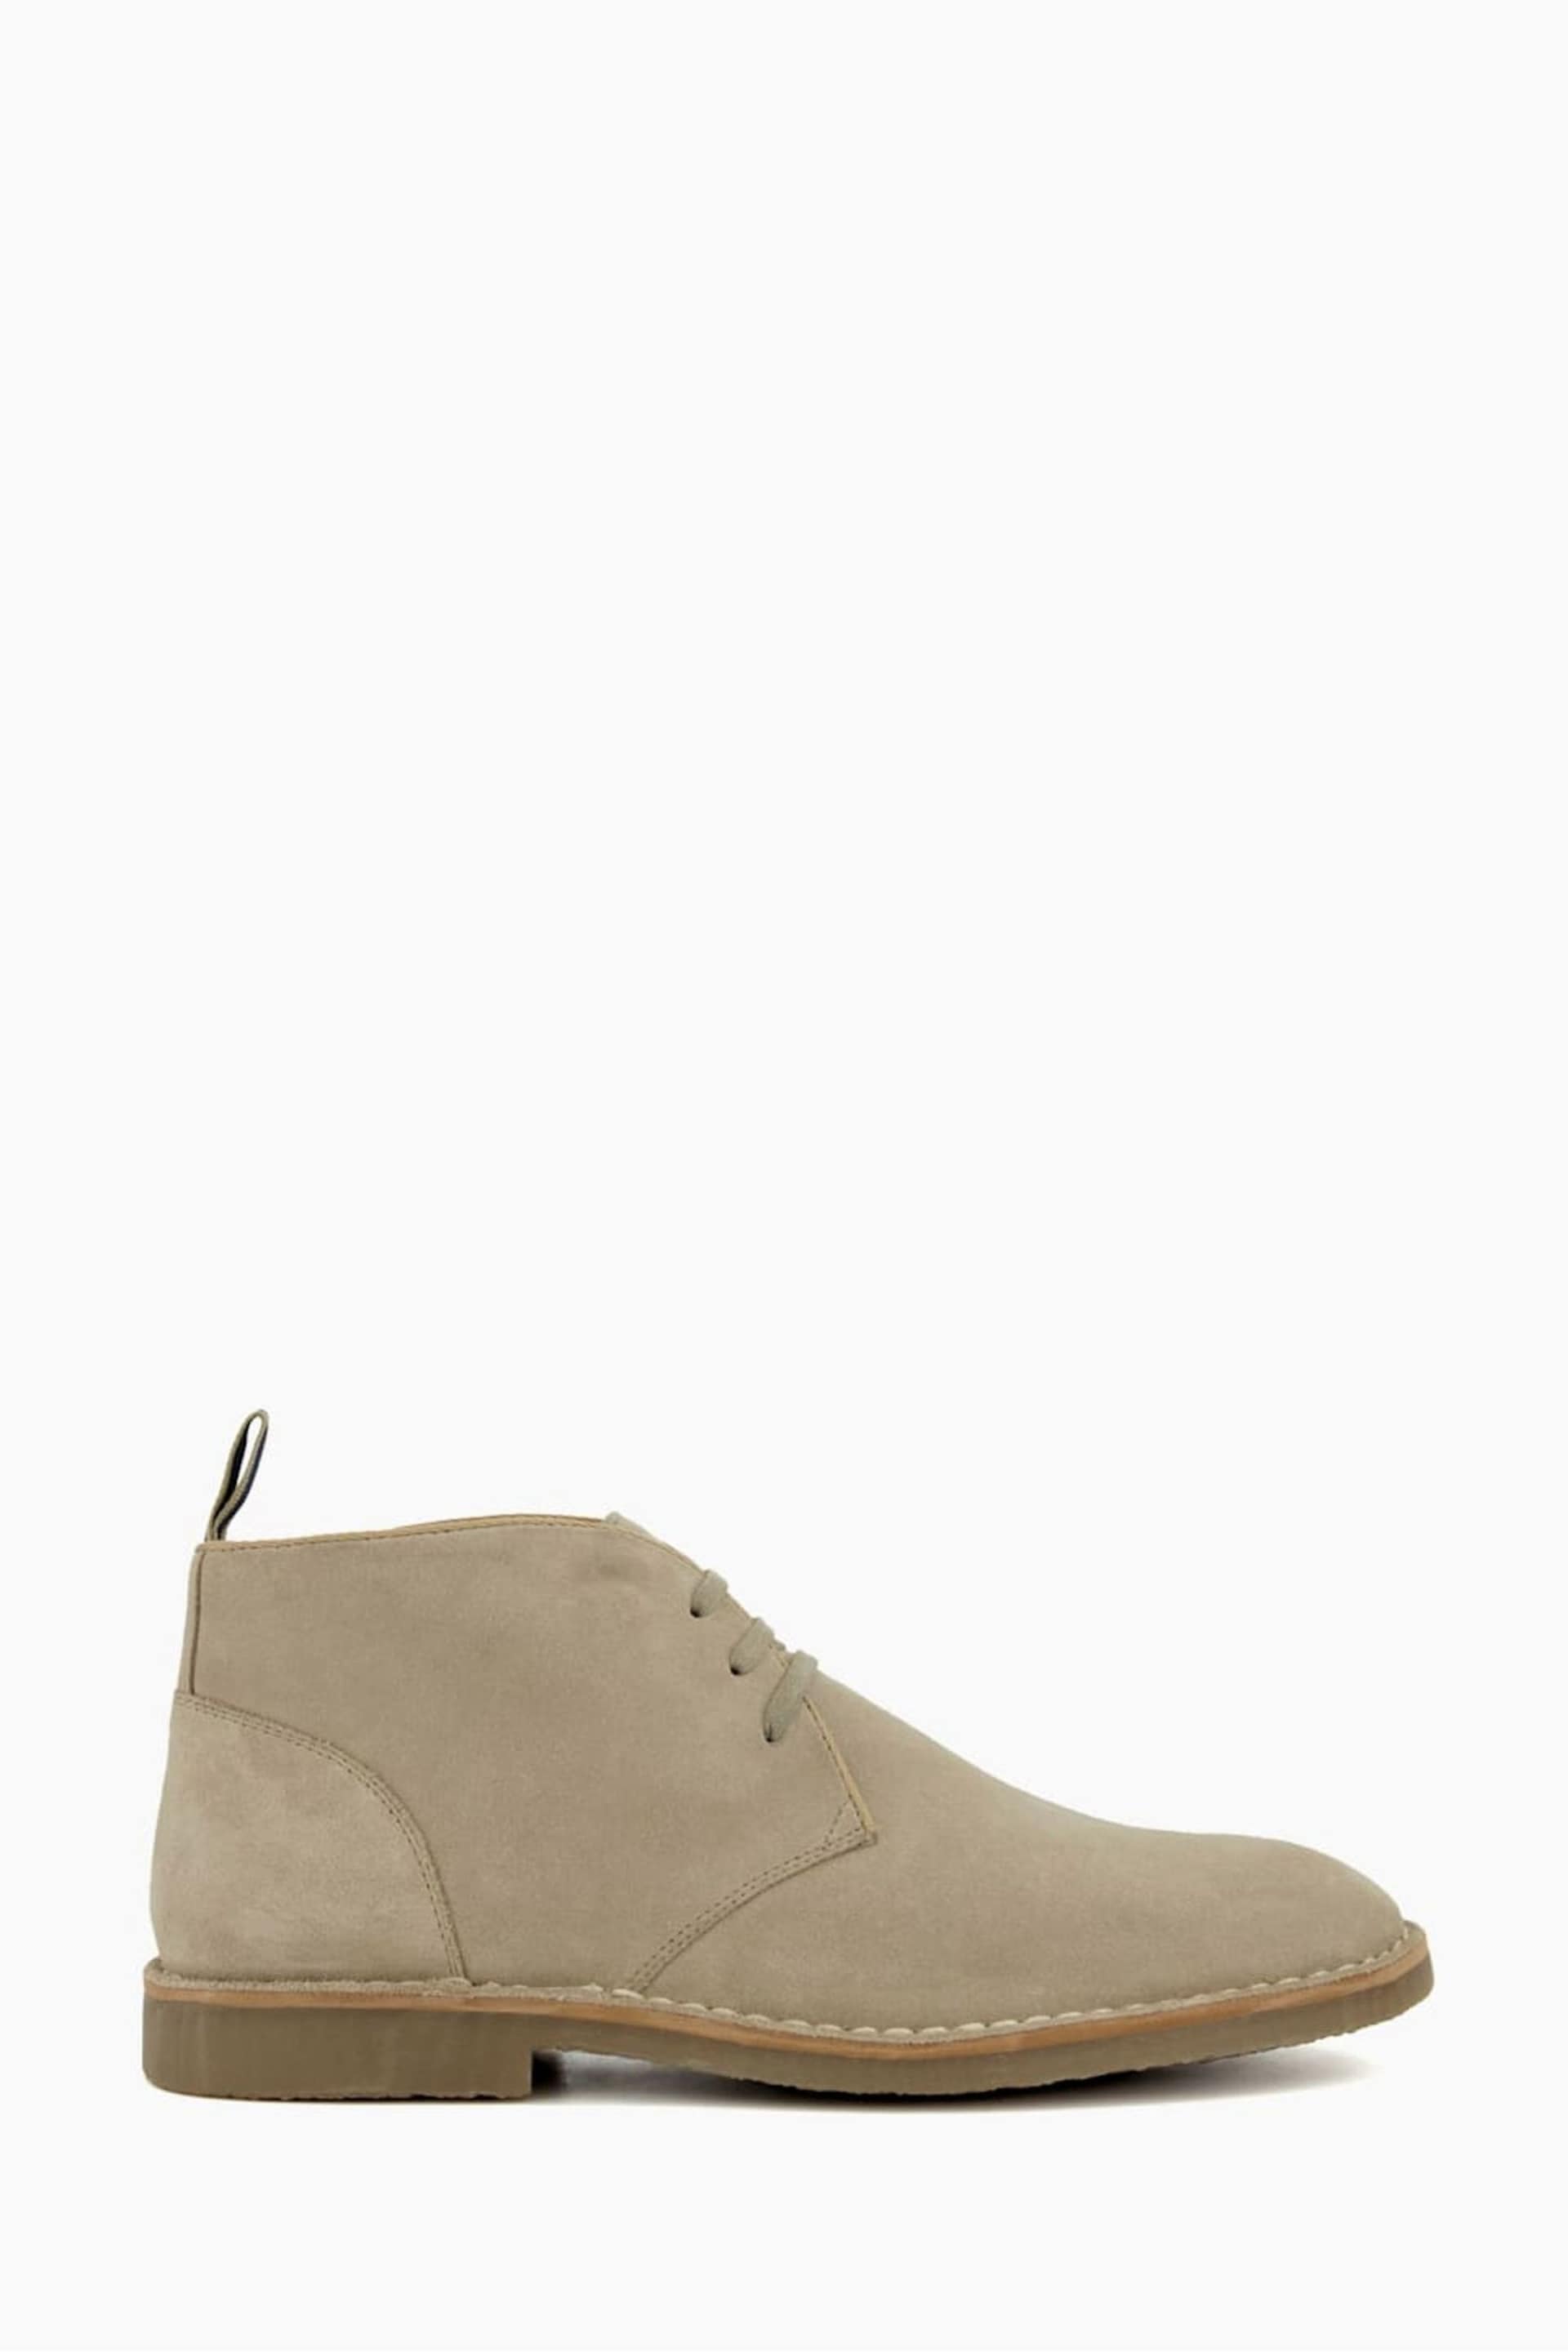 Dune London Natural Cashed Chukka Boots - Image 1 of 6